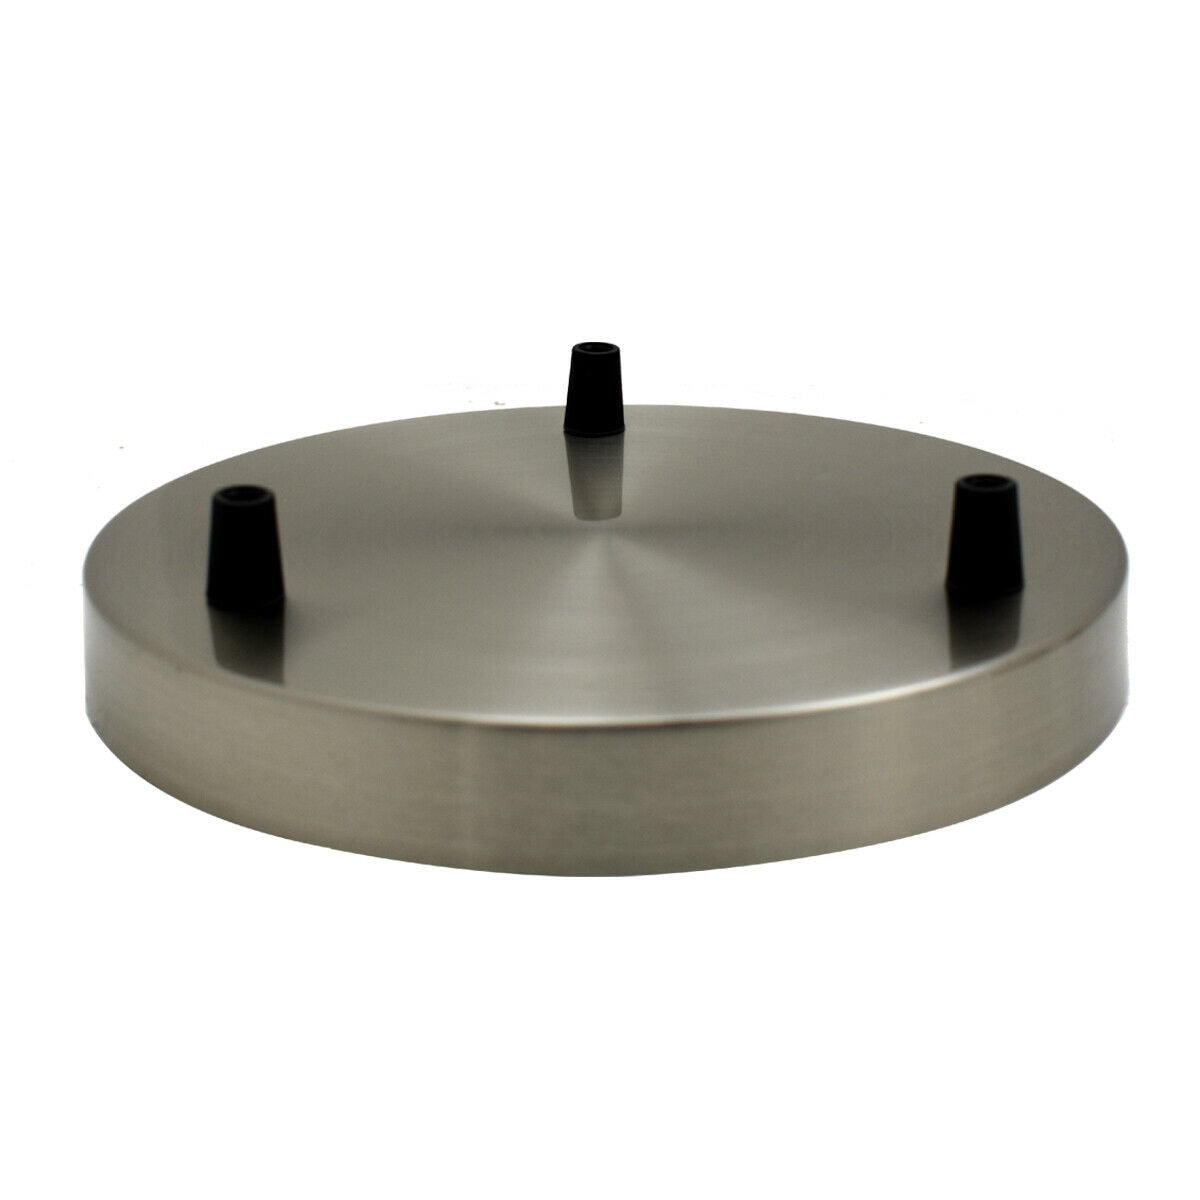 Metal 3-way outlet ceiling rose